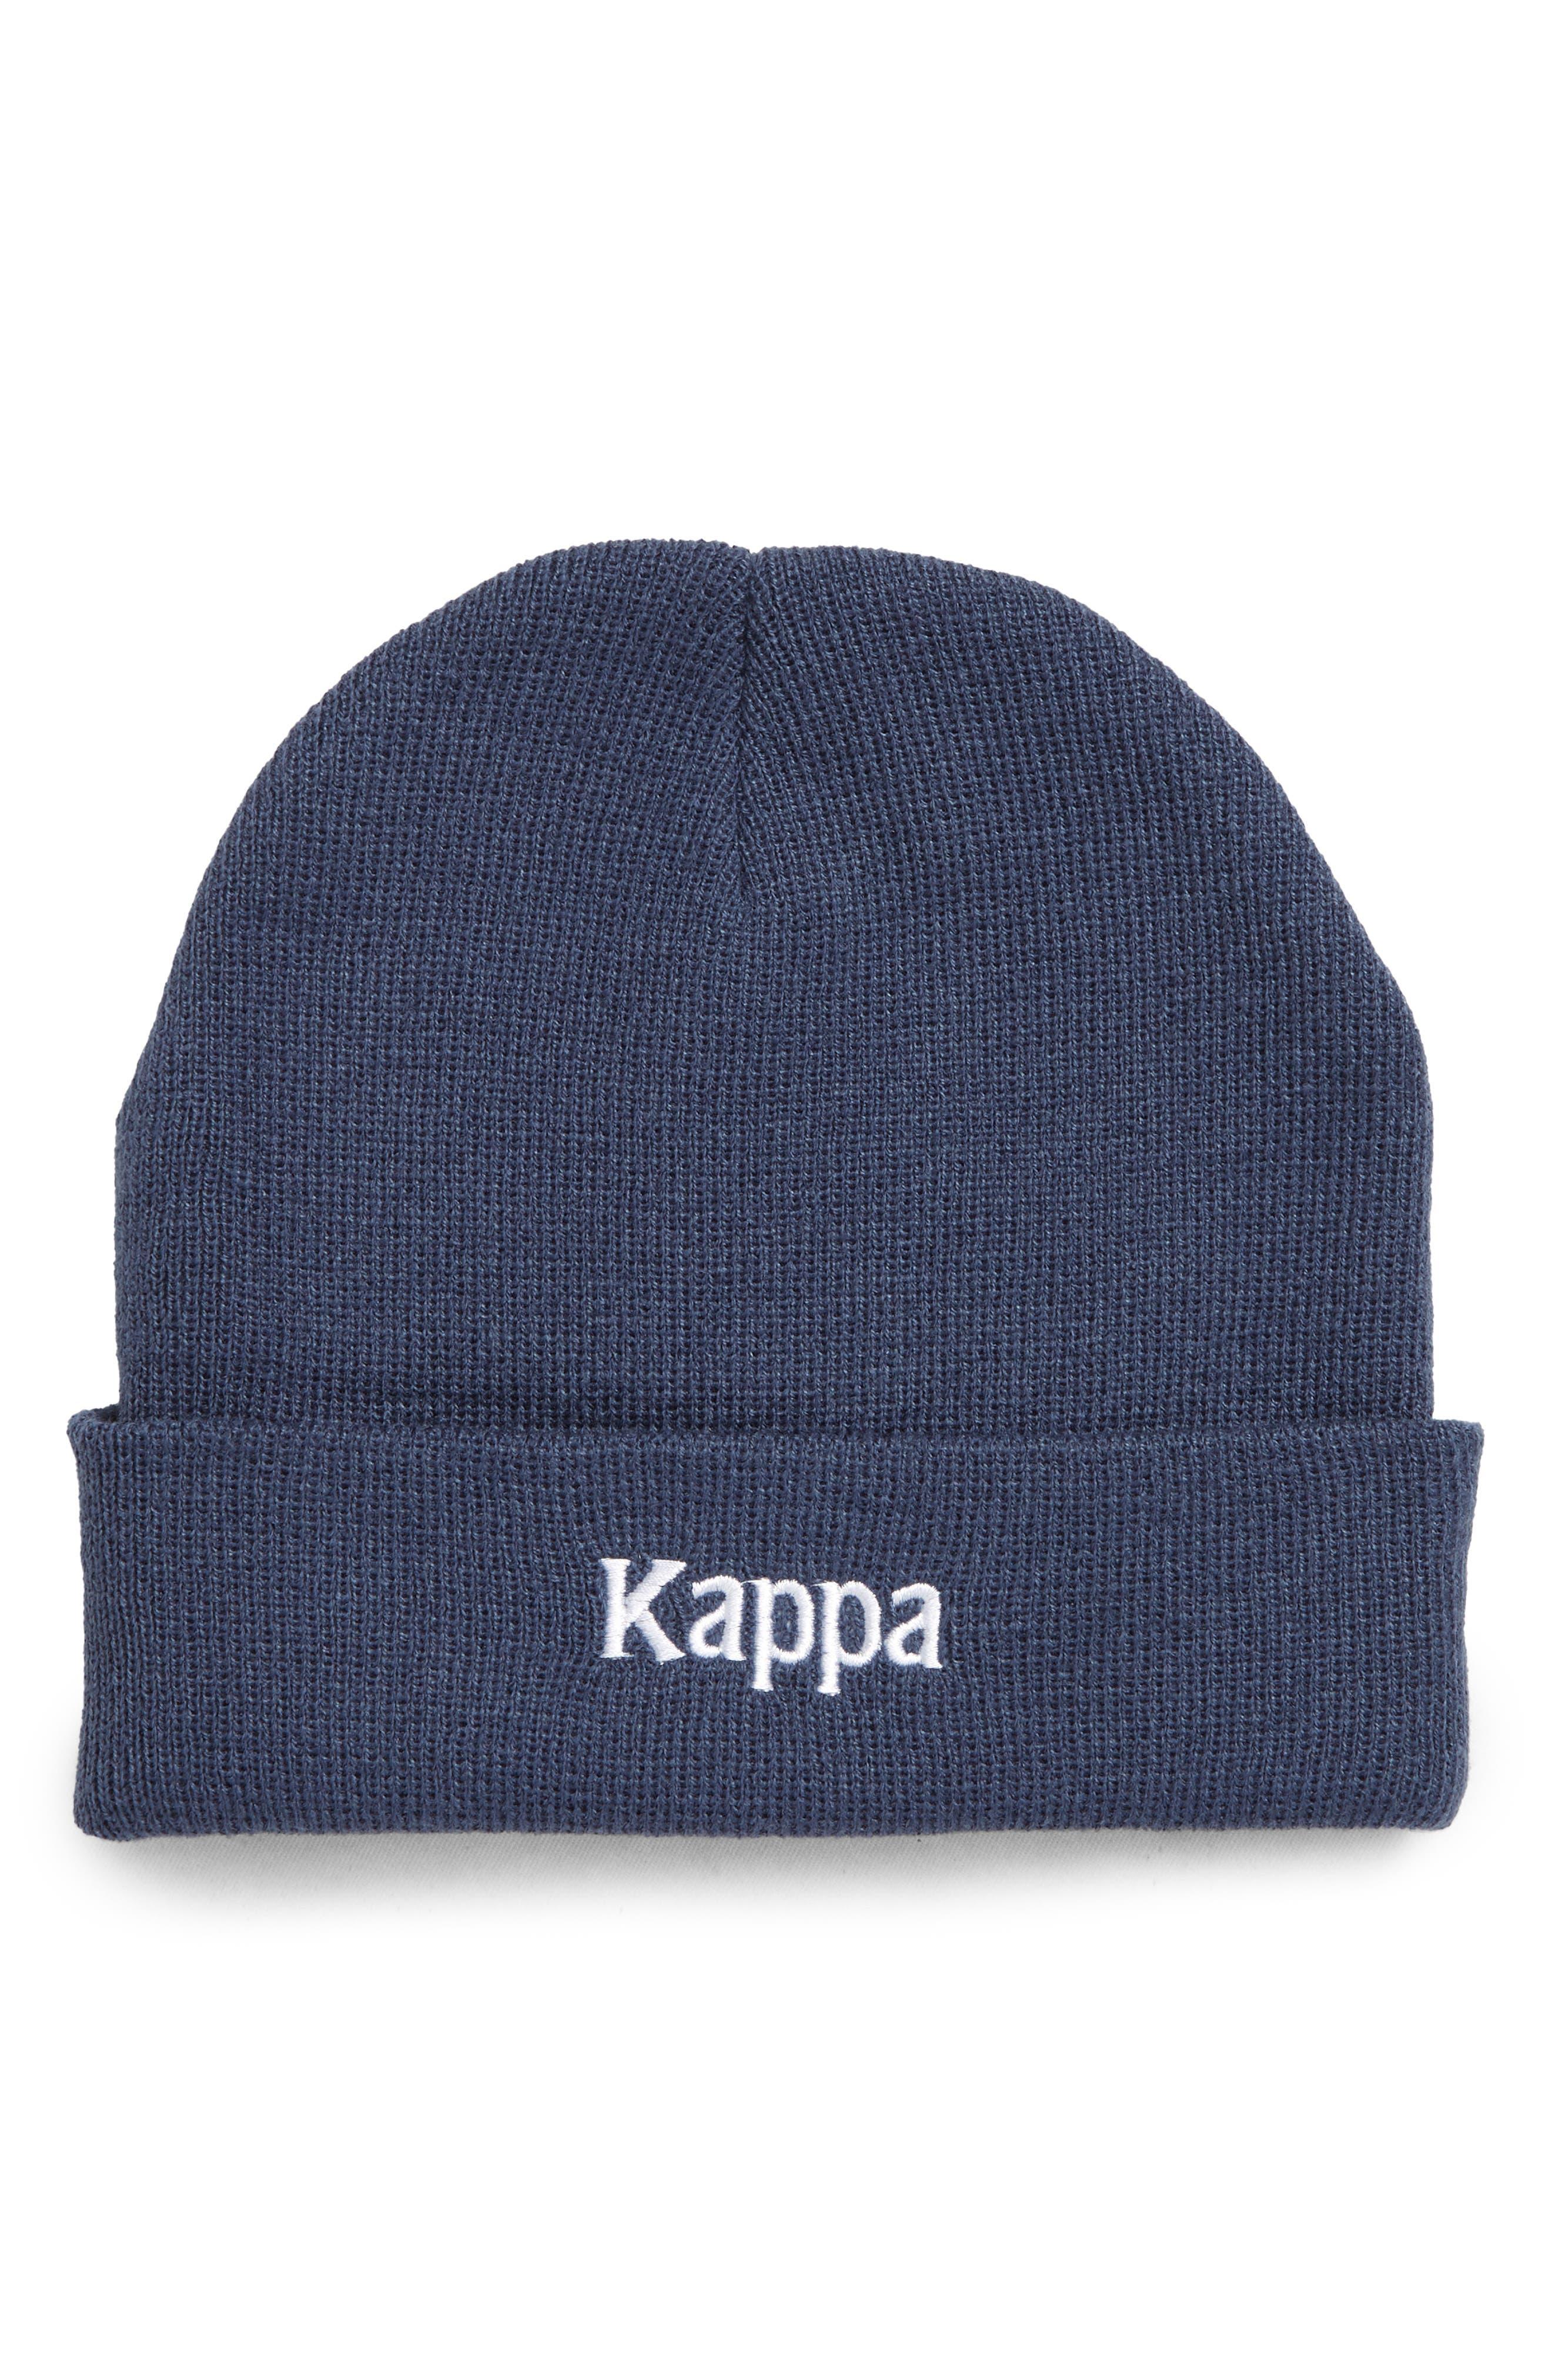 Kappa Authentic Giada Beanie In Blue Steel-white Bright At Nordstrom Rack  for Men | Lyst